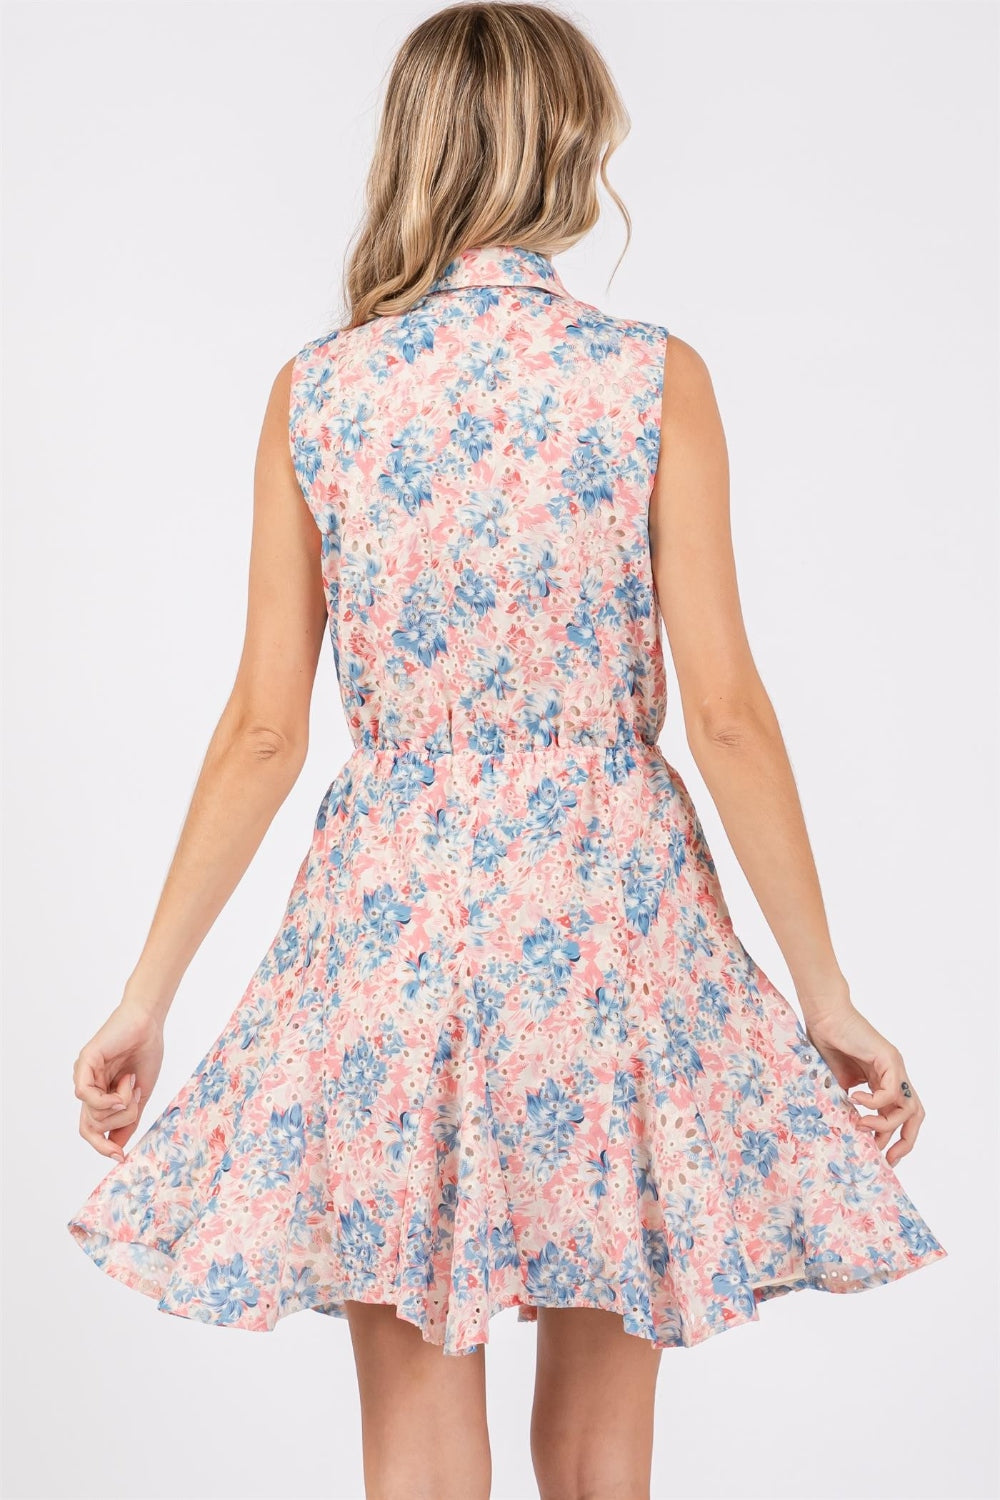 GeeGee Full Size Floral Eyelet Sleeveless Mini Dress-Dresses-Inspired by Justeen-Women's Clothing Boutique in Chicago, Illinois